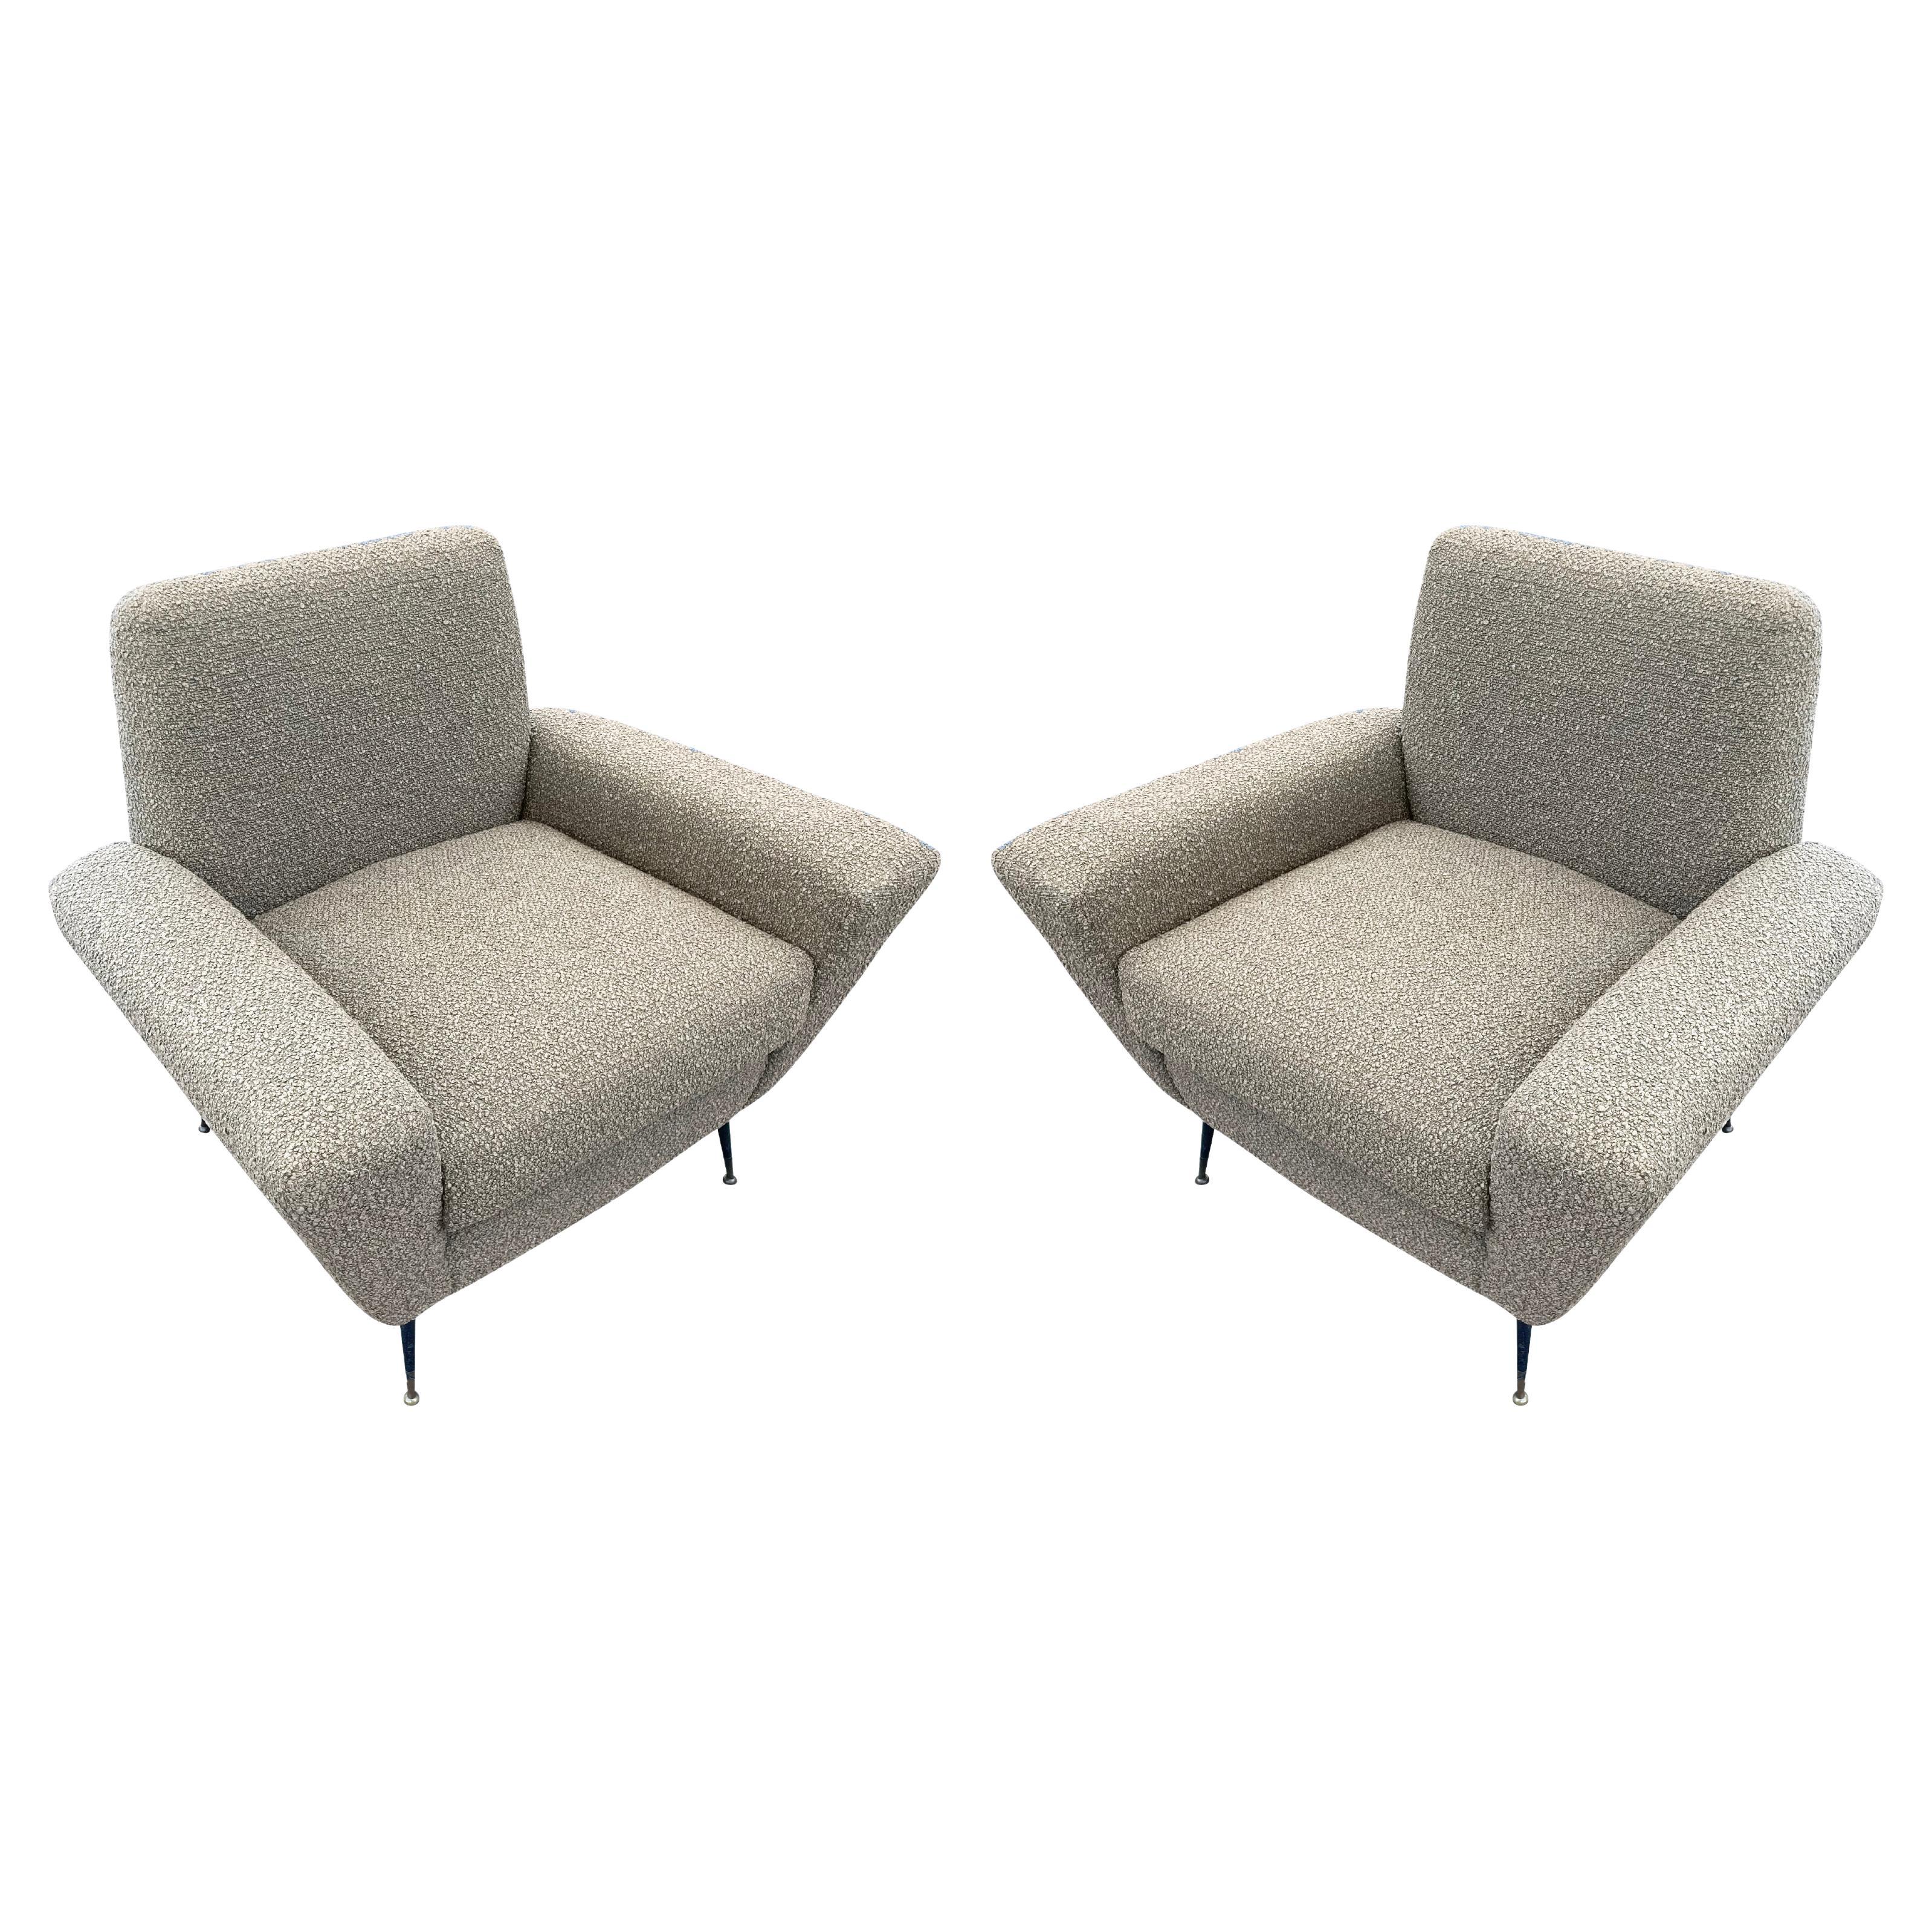 Italian Midcentury Lounge Chairs by Lenzi For Sale